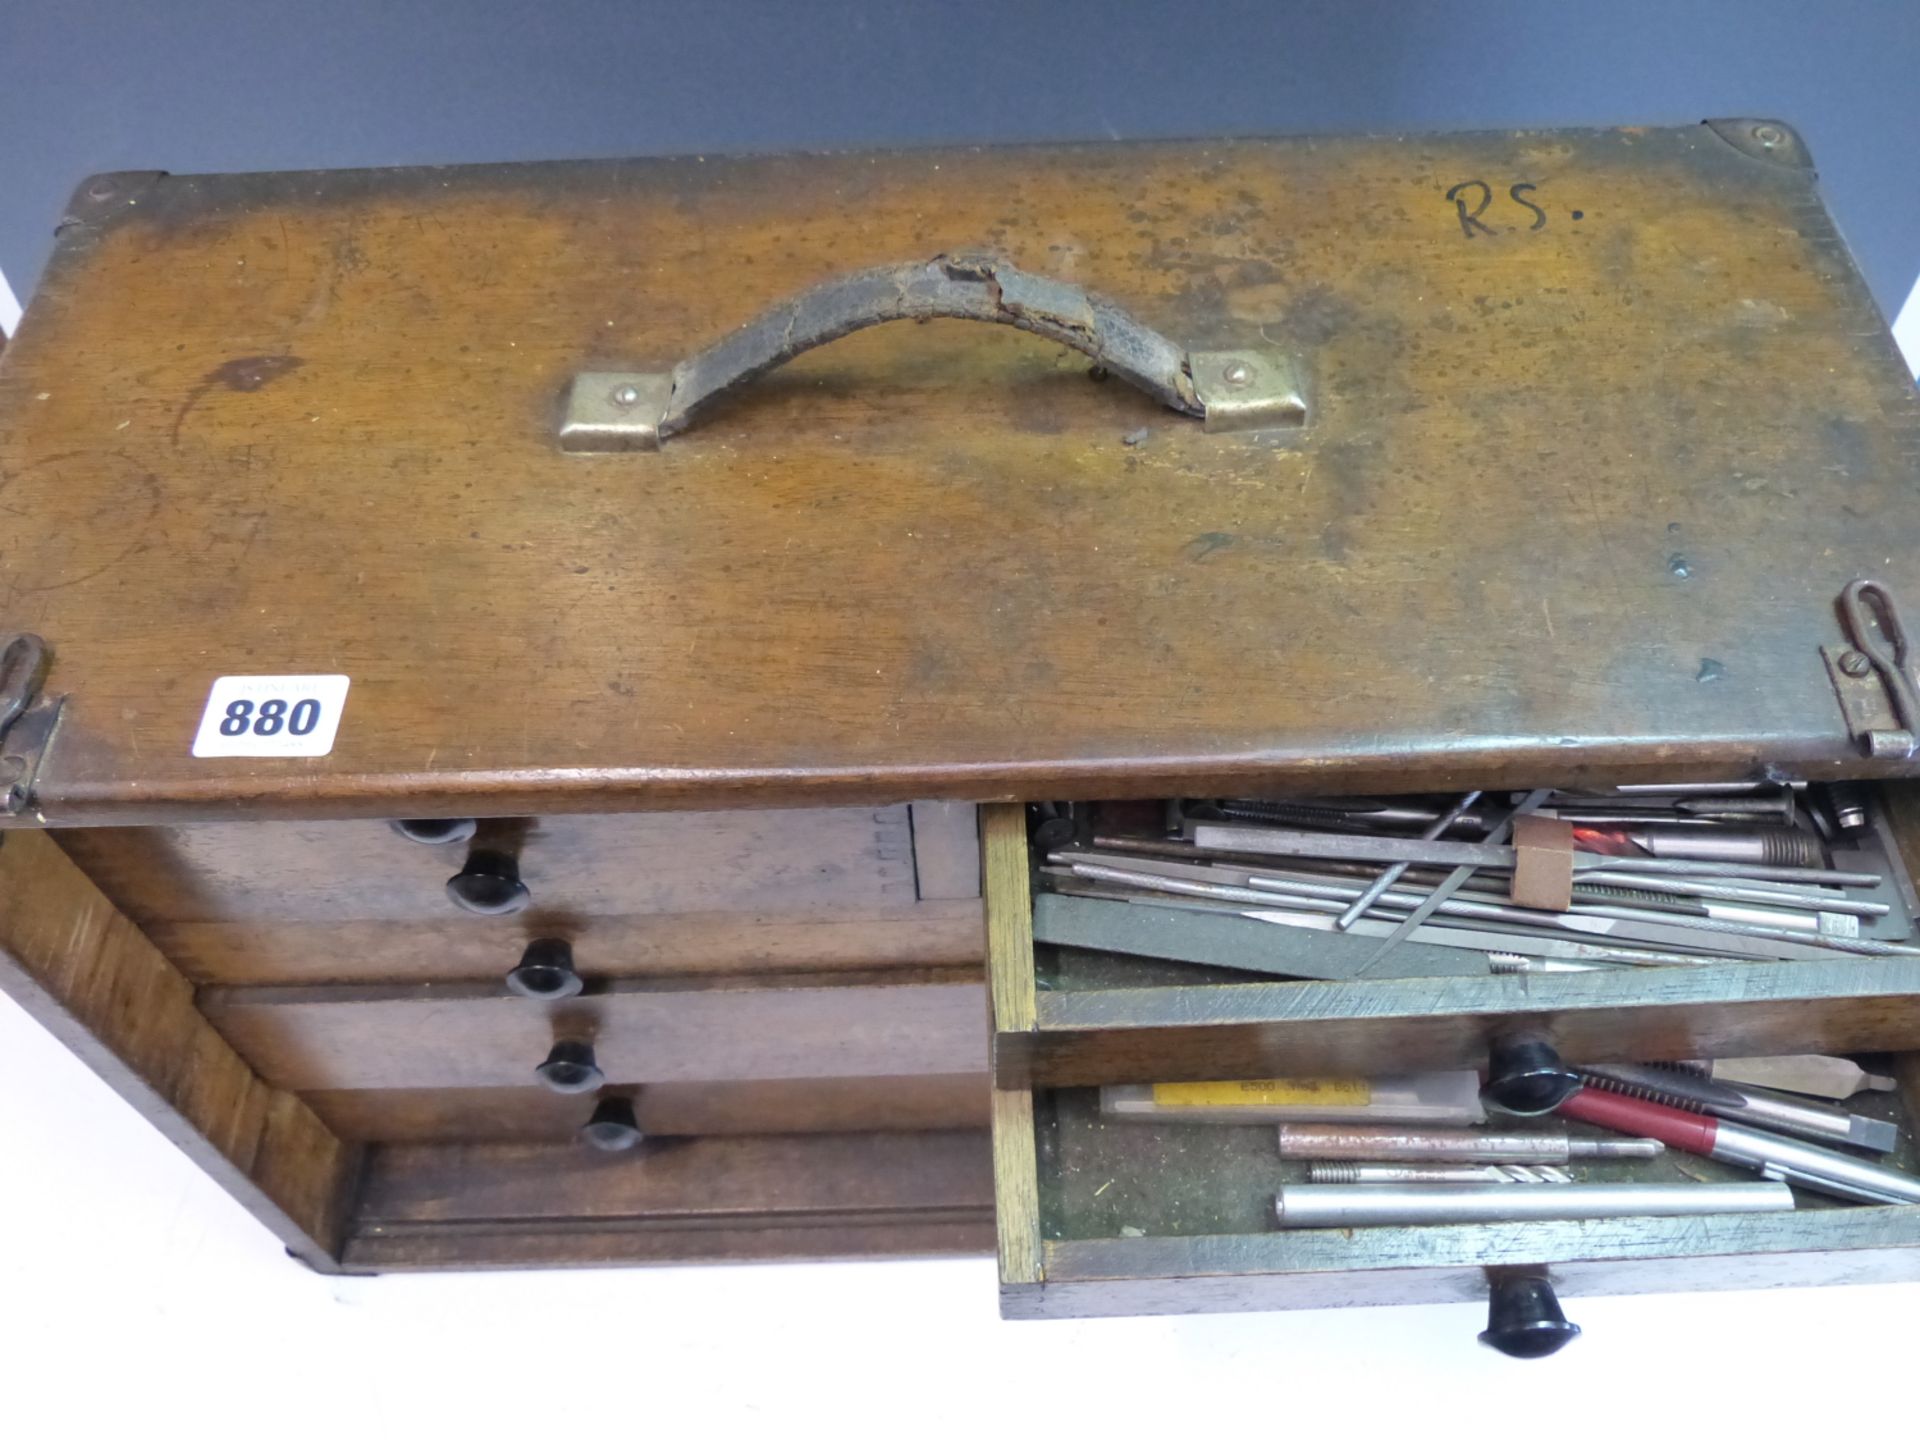 A VINTAGE WOODEN TOOL CHEST OF MULTIPLE DRAWERS, SOME CONTAINING MILLING AND OTHER TOOLS. - Image 6 of 6